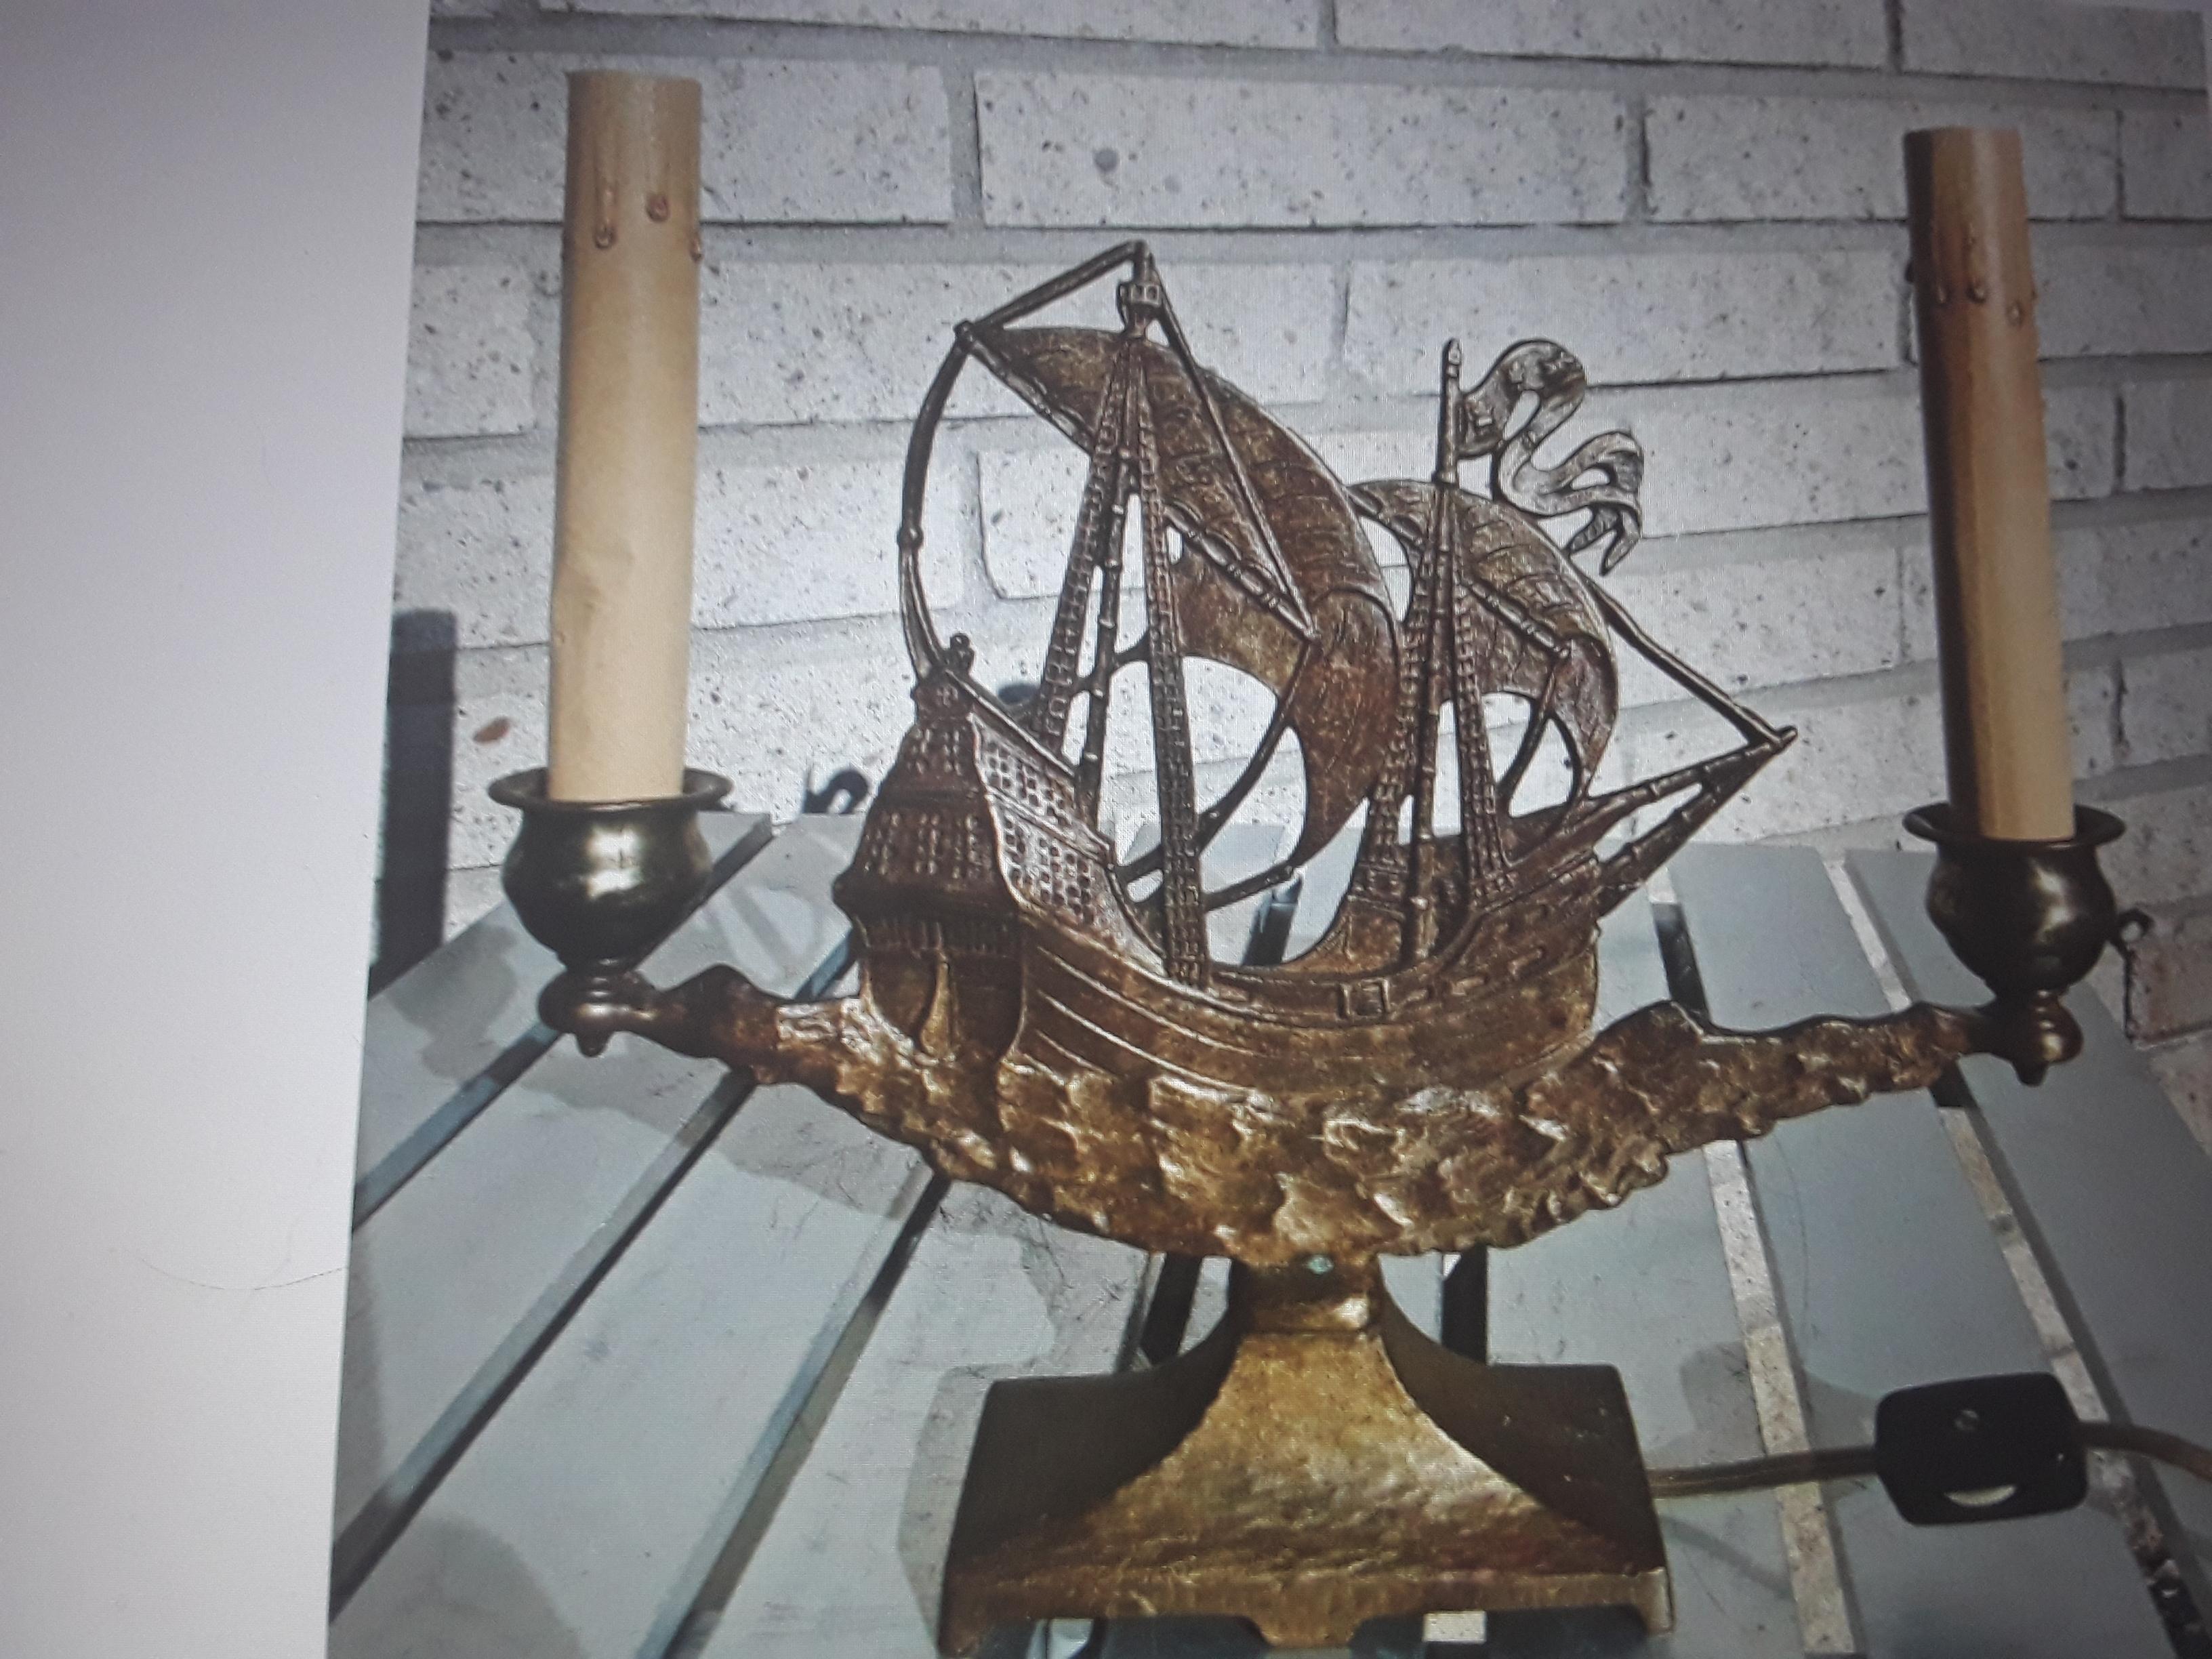 Beautiful 1920's French Art Deco Bronze Sailing Ship/ Boat Table Lamp. Oscar Bach era. Highly detailed and marked.
